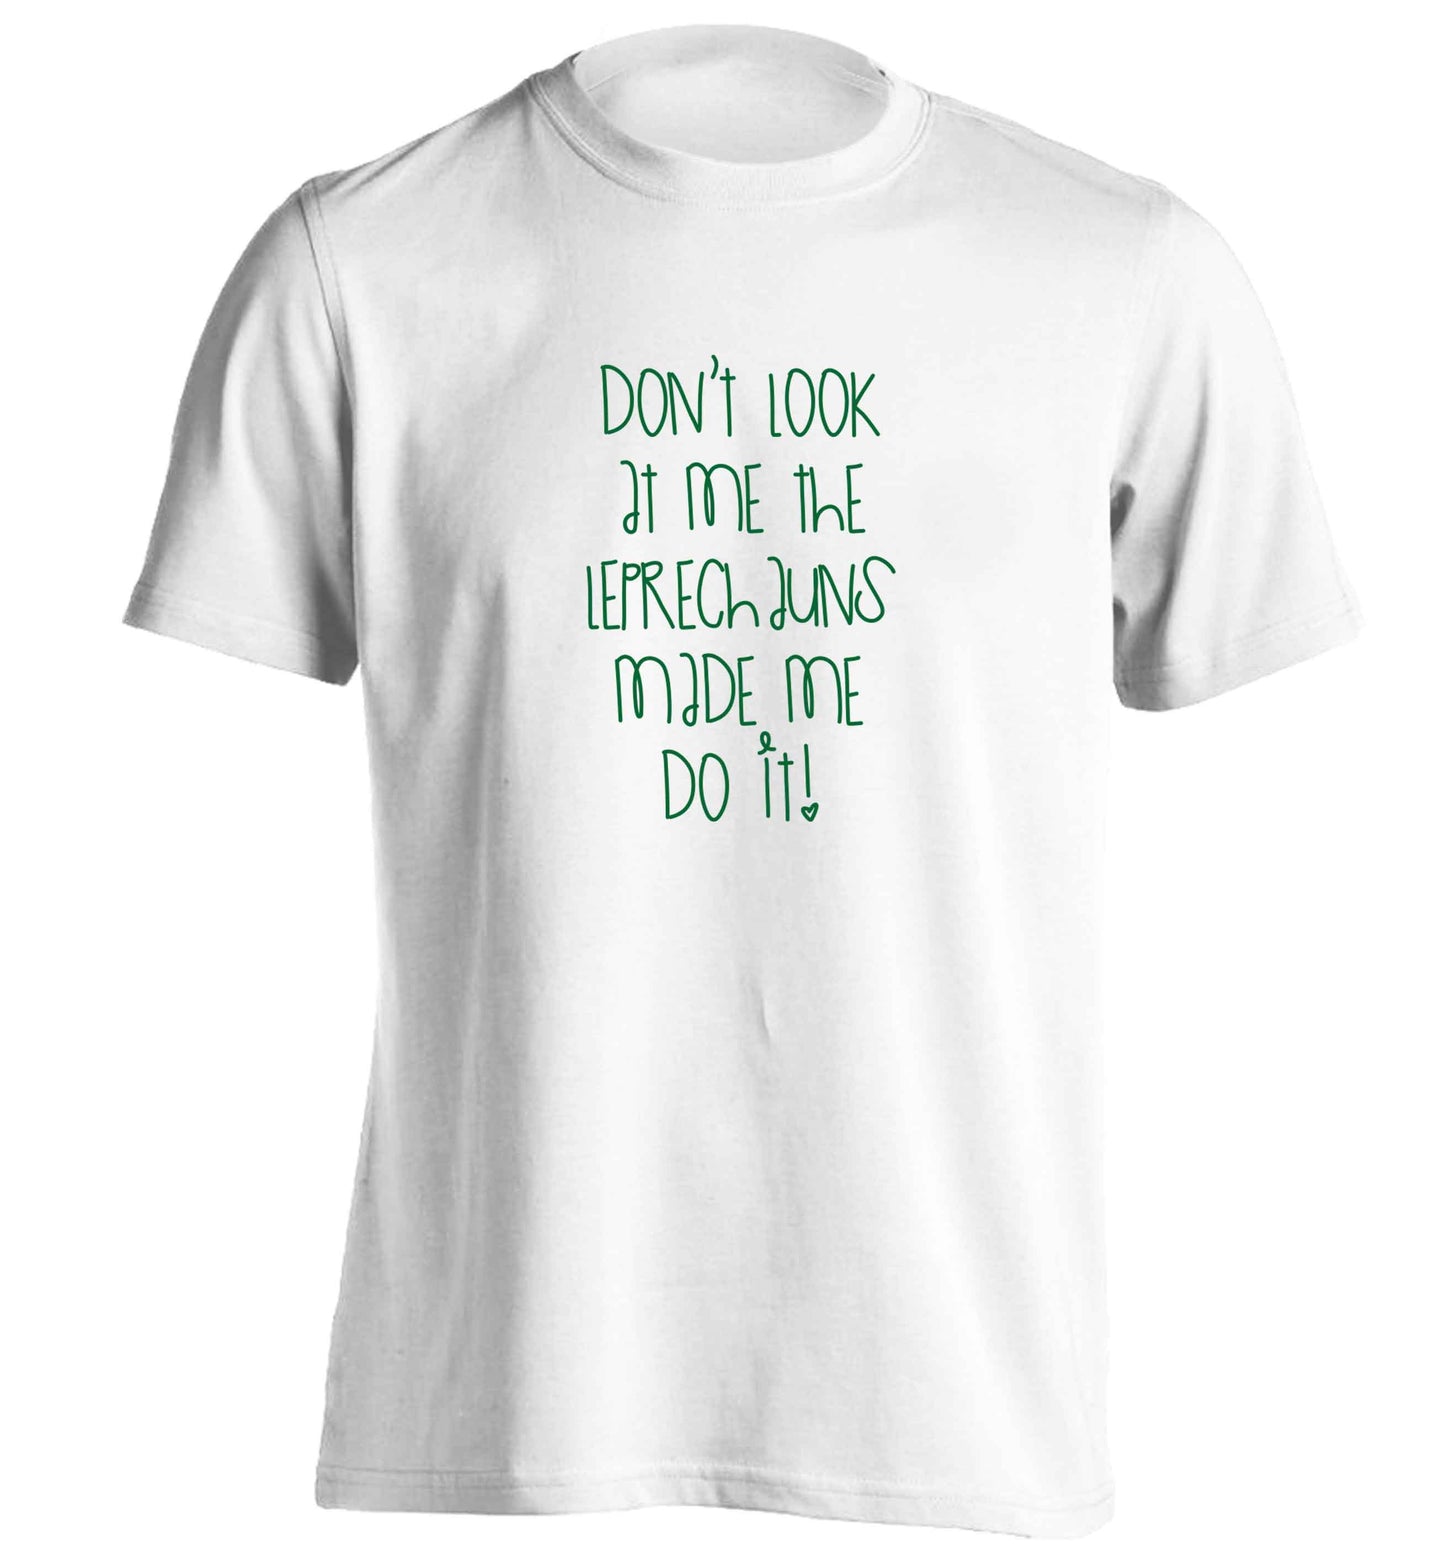 Don't look at me the leprechauns made me do it adults unisex white Tshirt 2XL